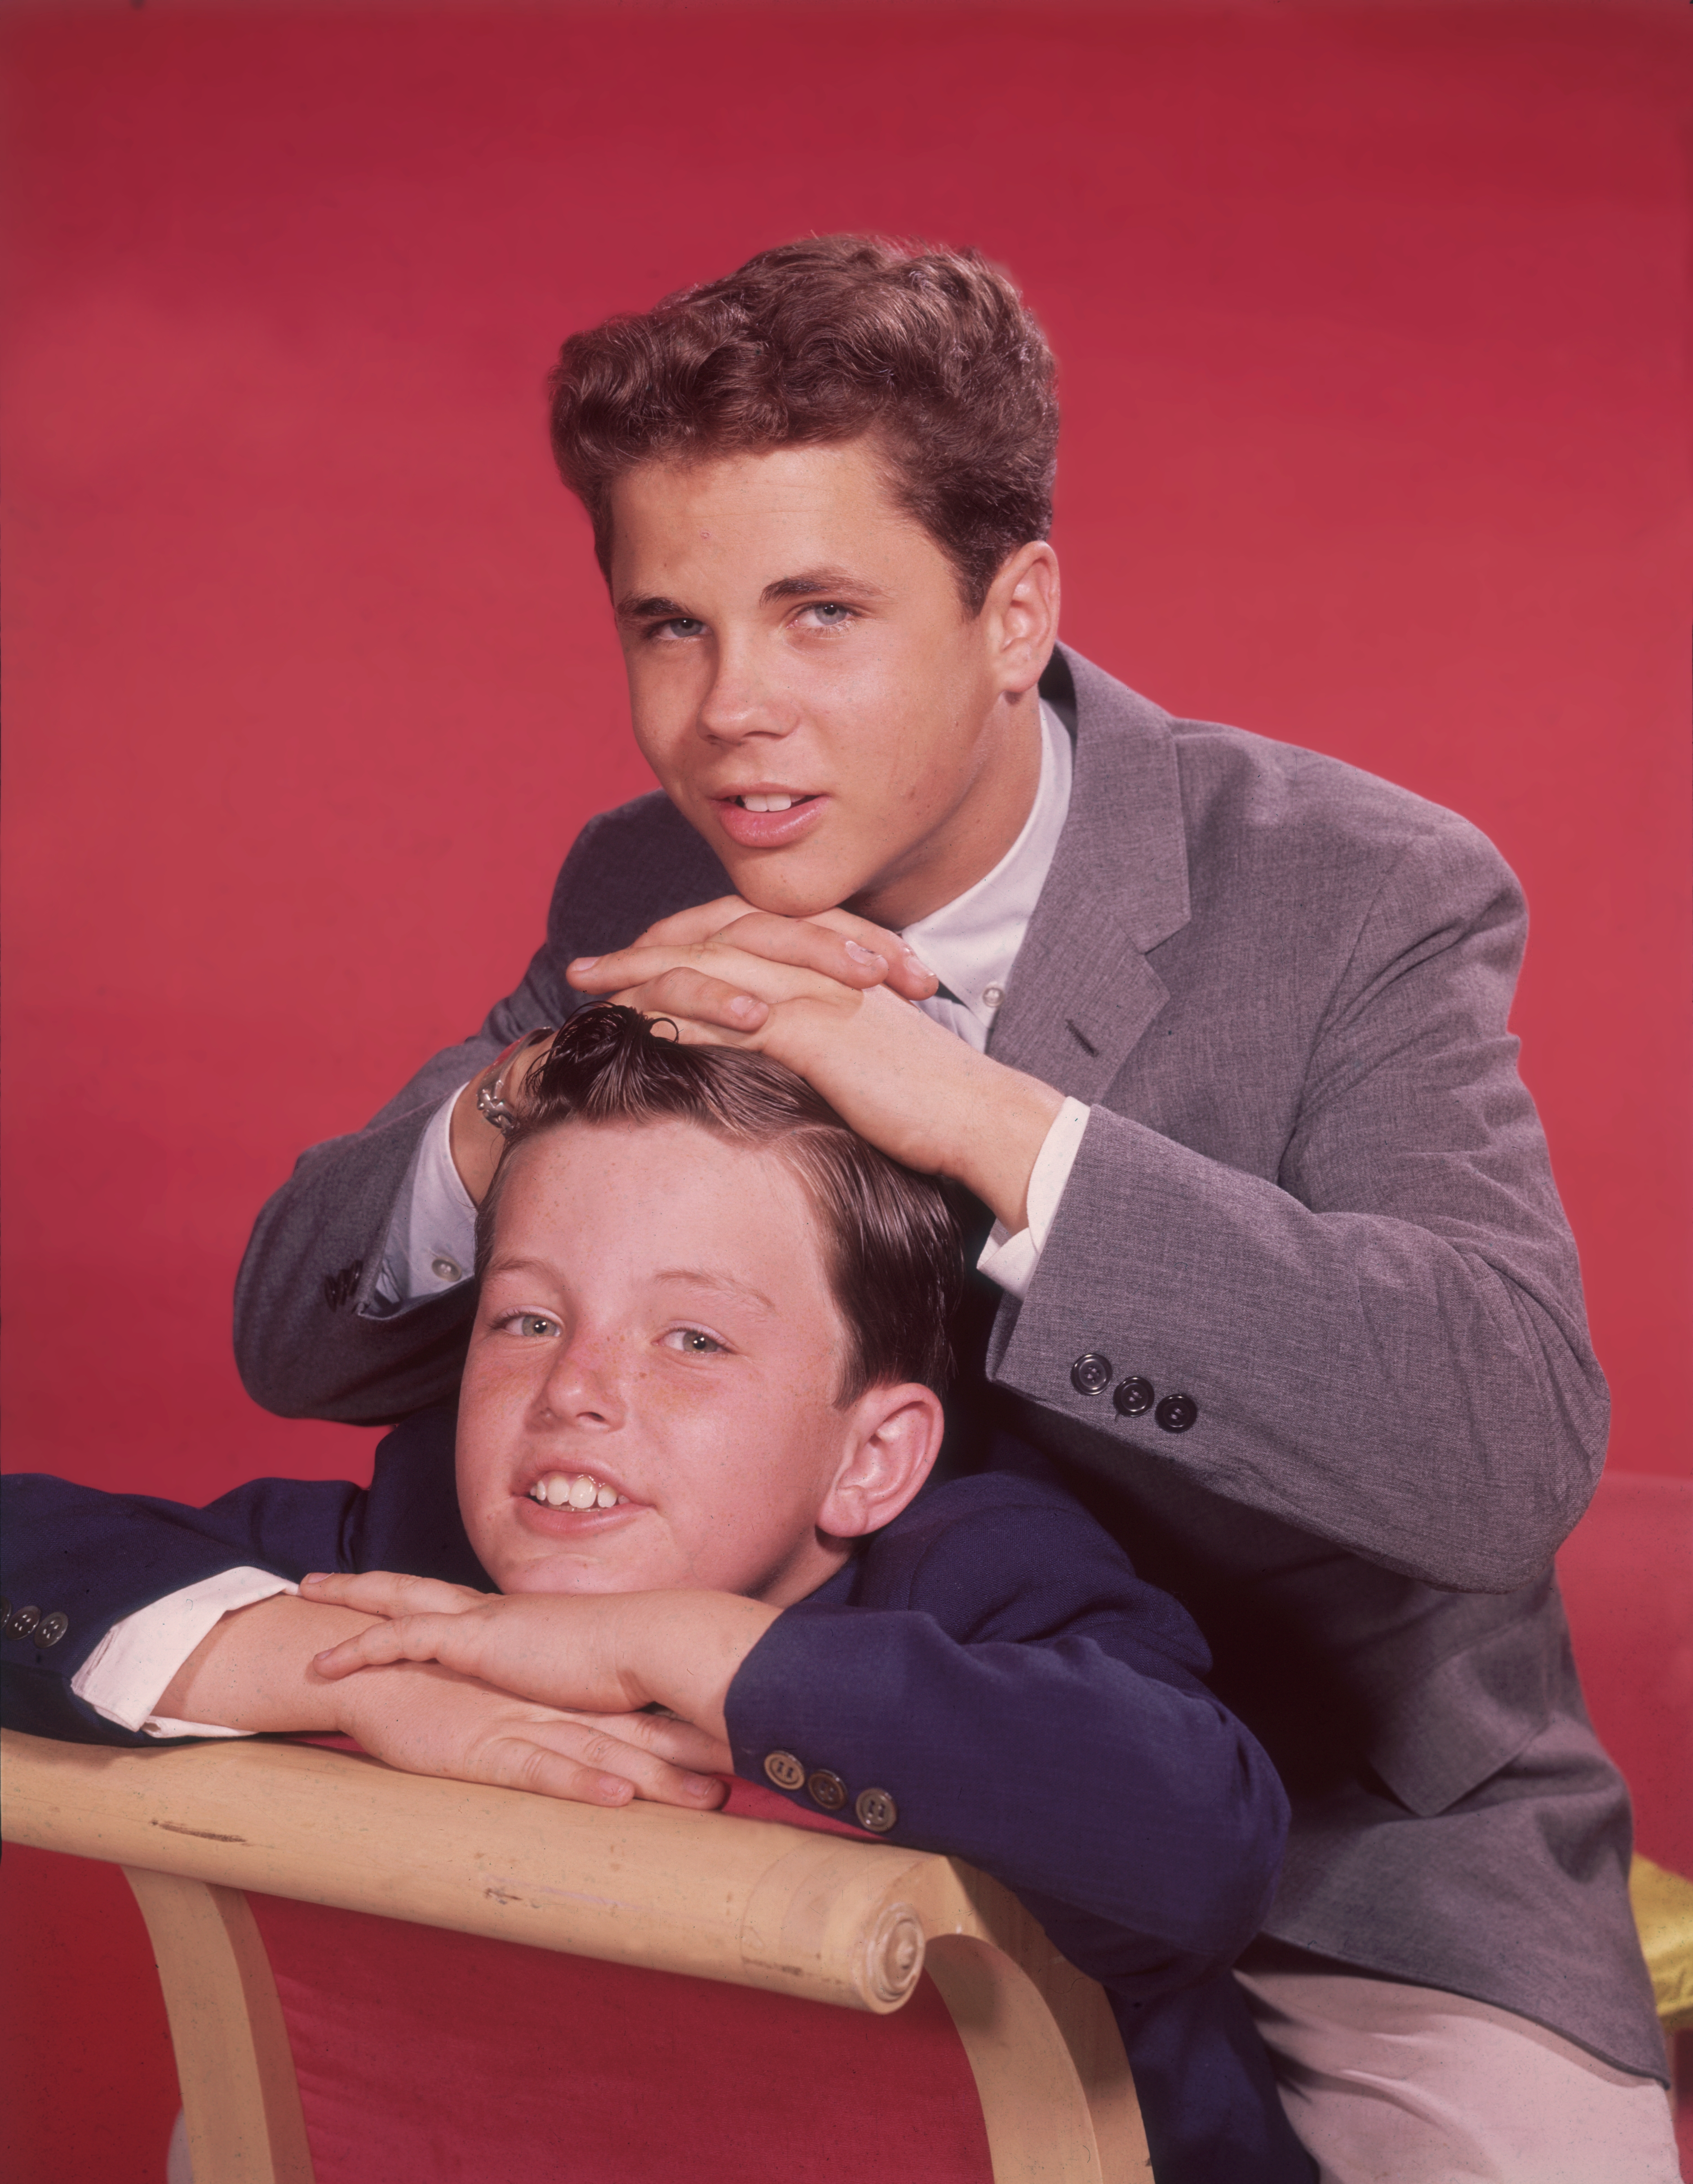 Jerry Mathers and Tony Dow as Beaver 'Theodore' Cleaver and Wally Cleaver in "Leave It to Beaver" in 1957 | Source: Getty Images